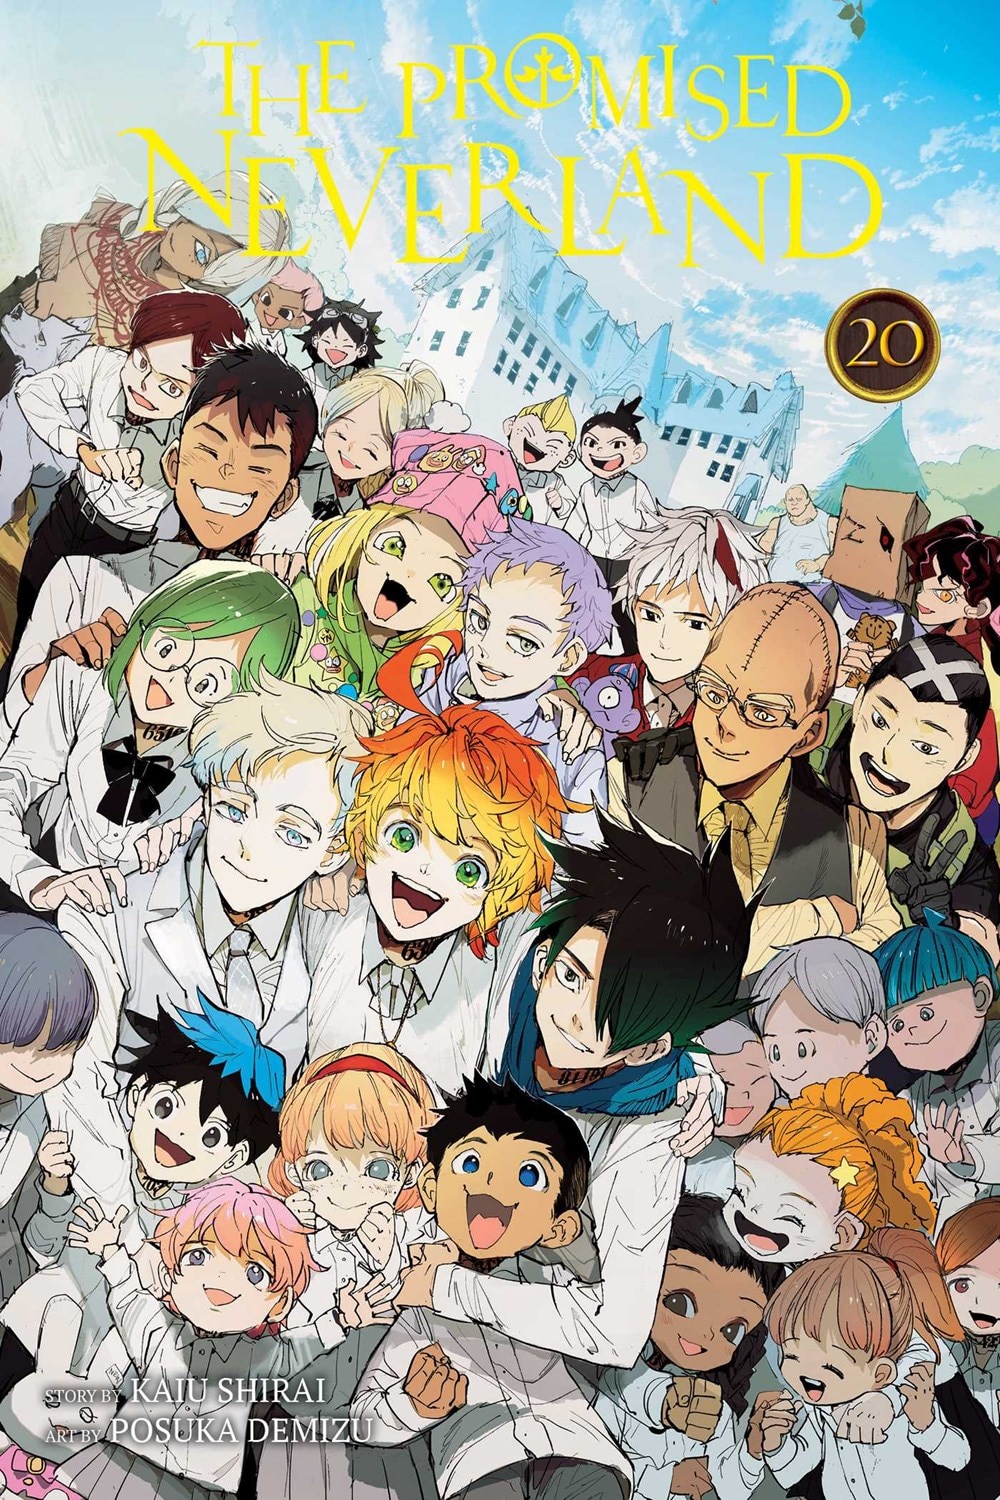 The Promised Neverland  Vol. 20  20